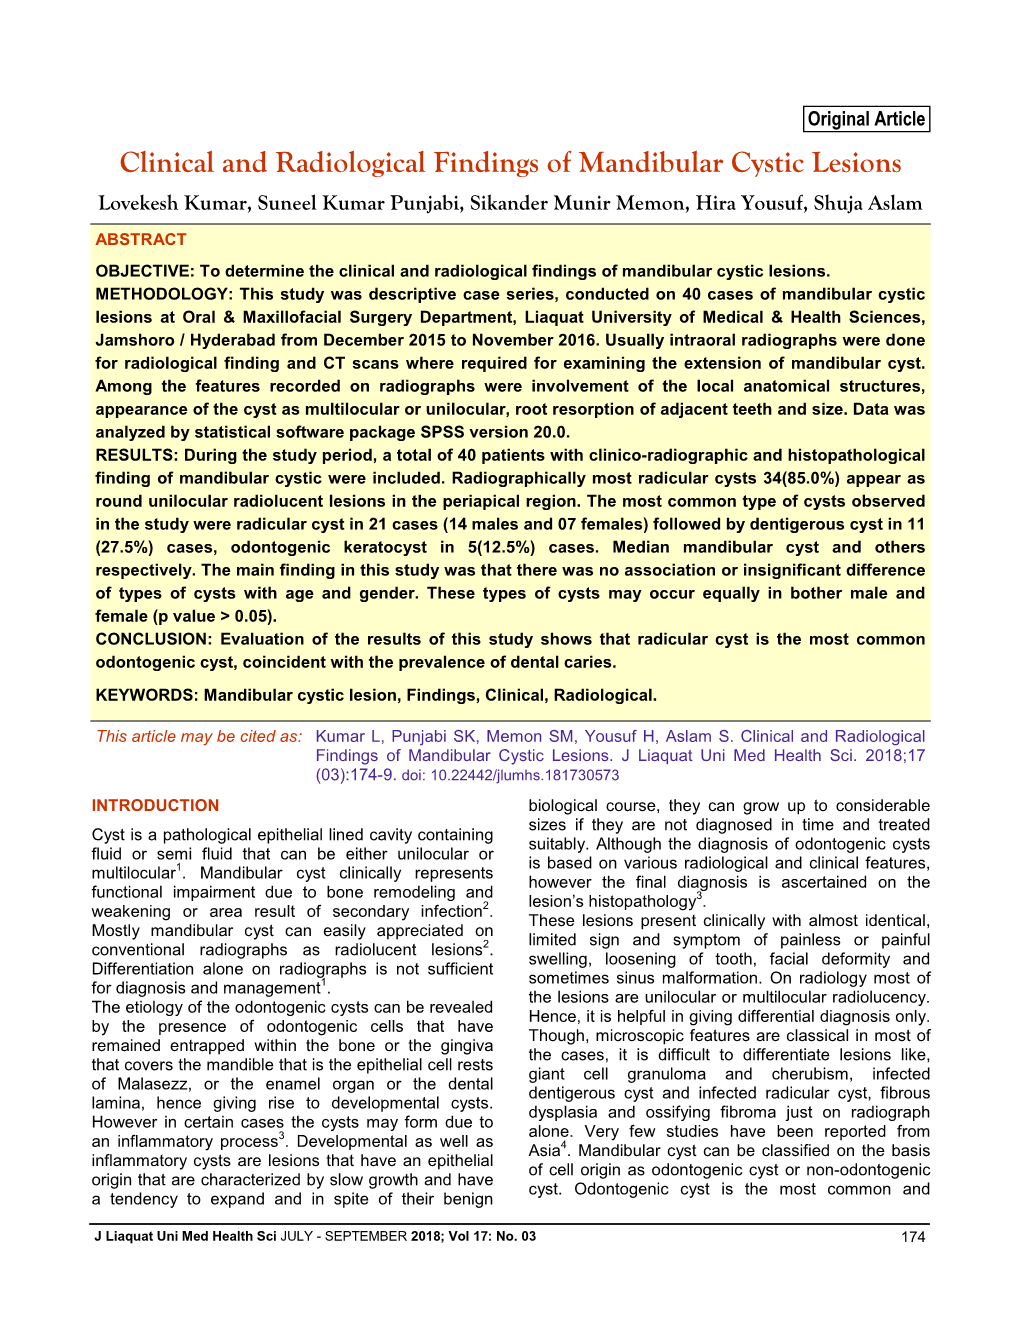 Clinical and Radiological Findings of Mandibular Cystic Lesions